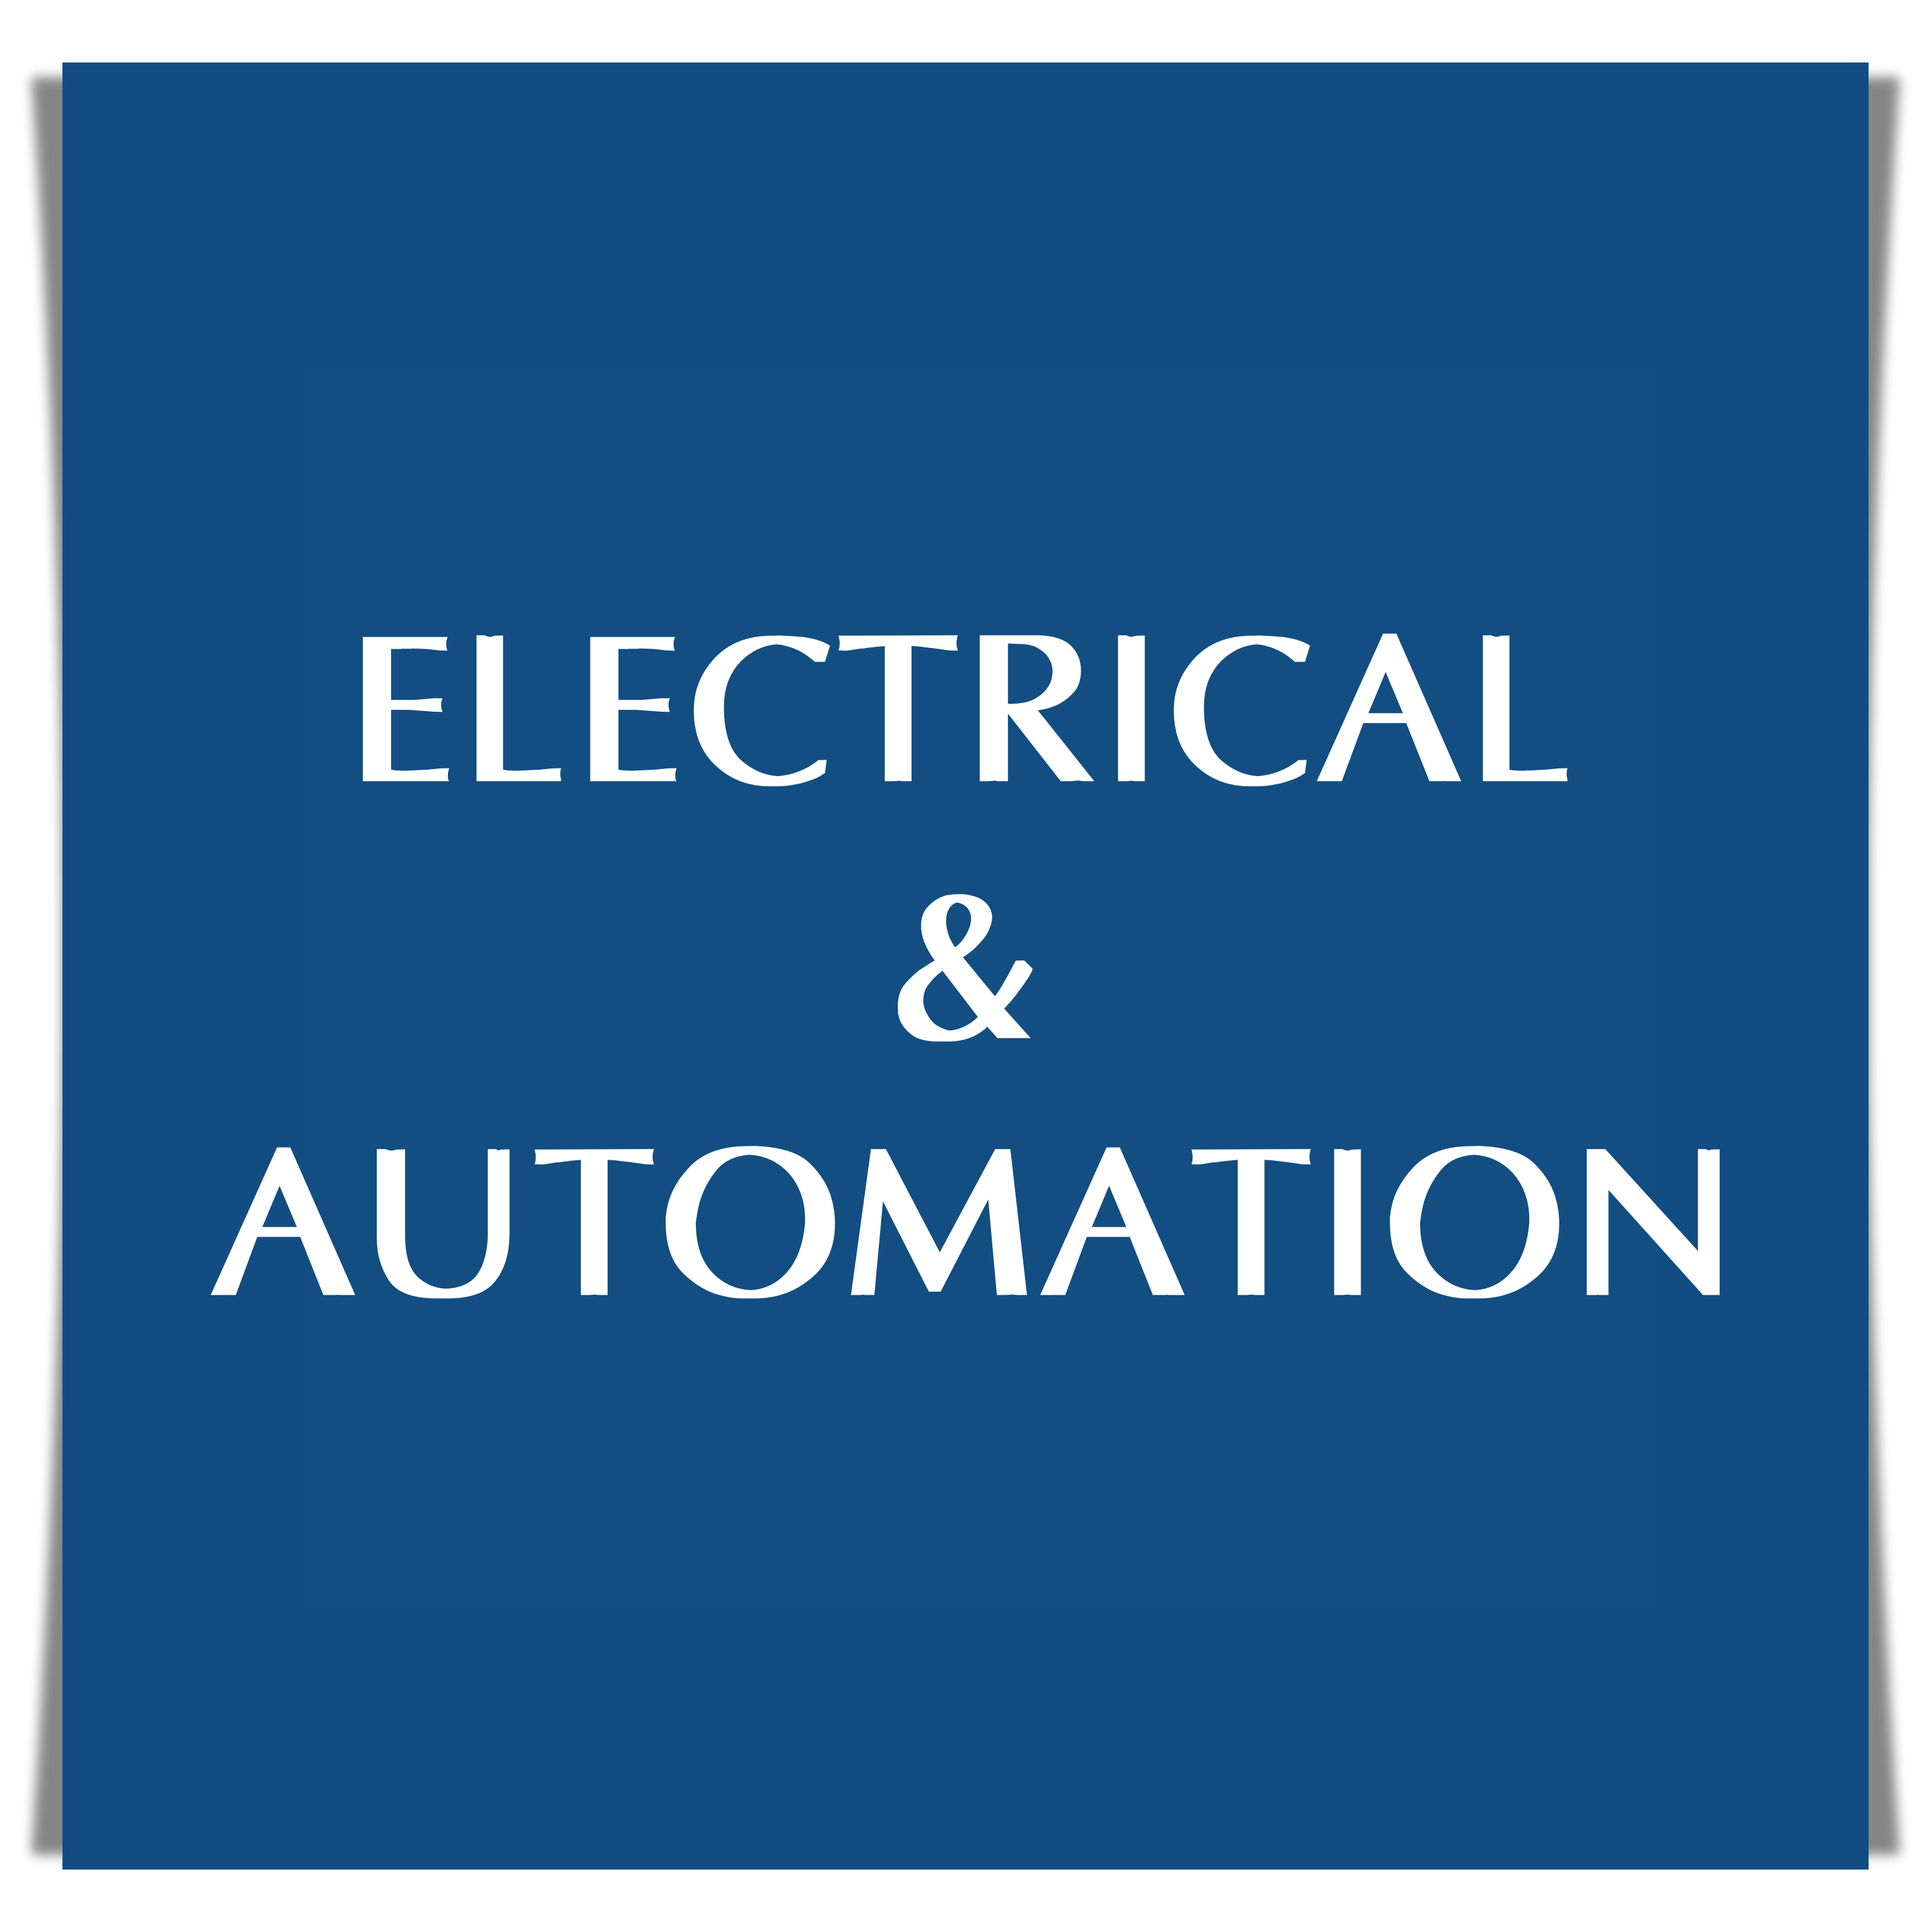 ELECTRICAL&AUTOMATION